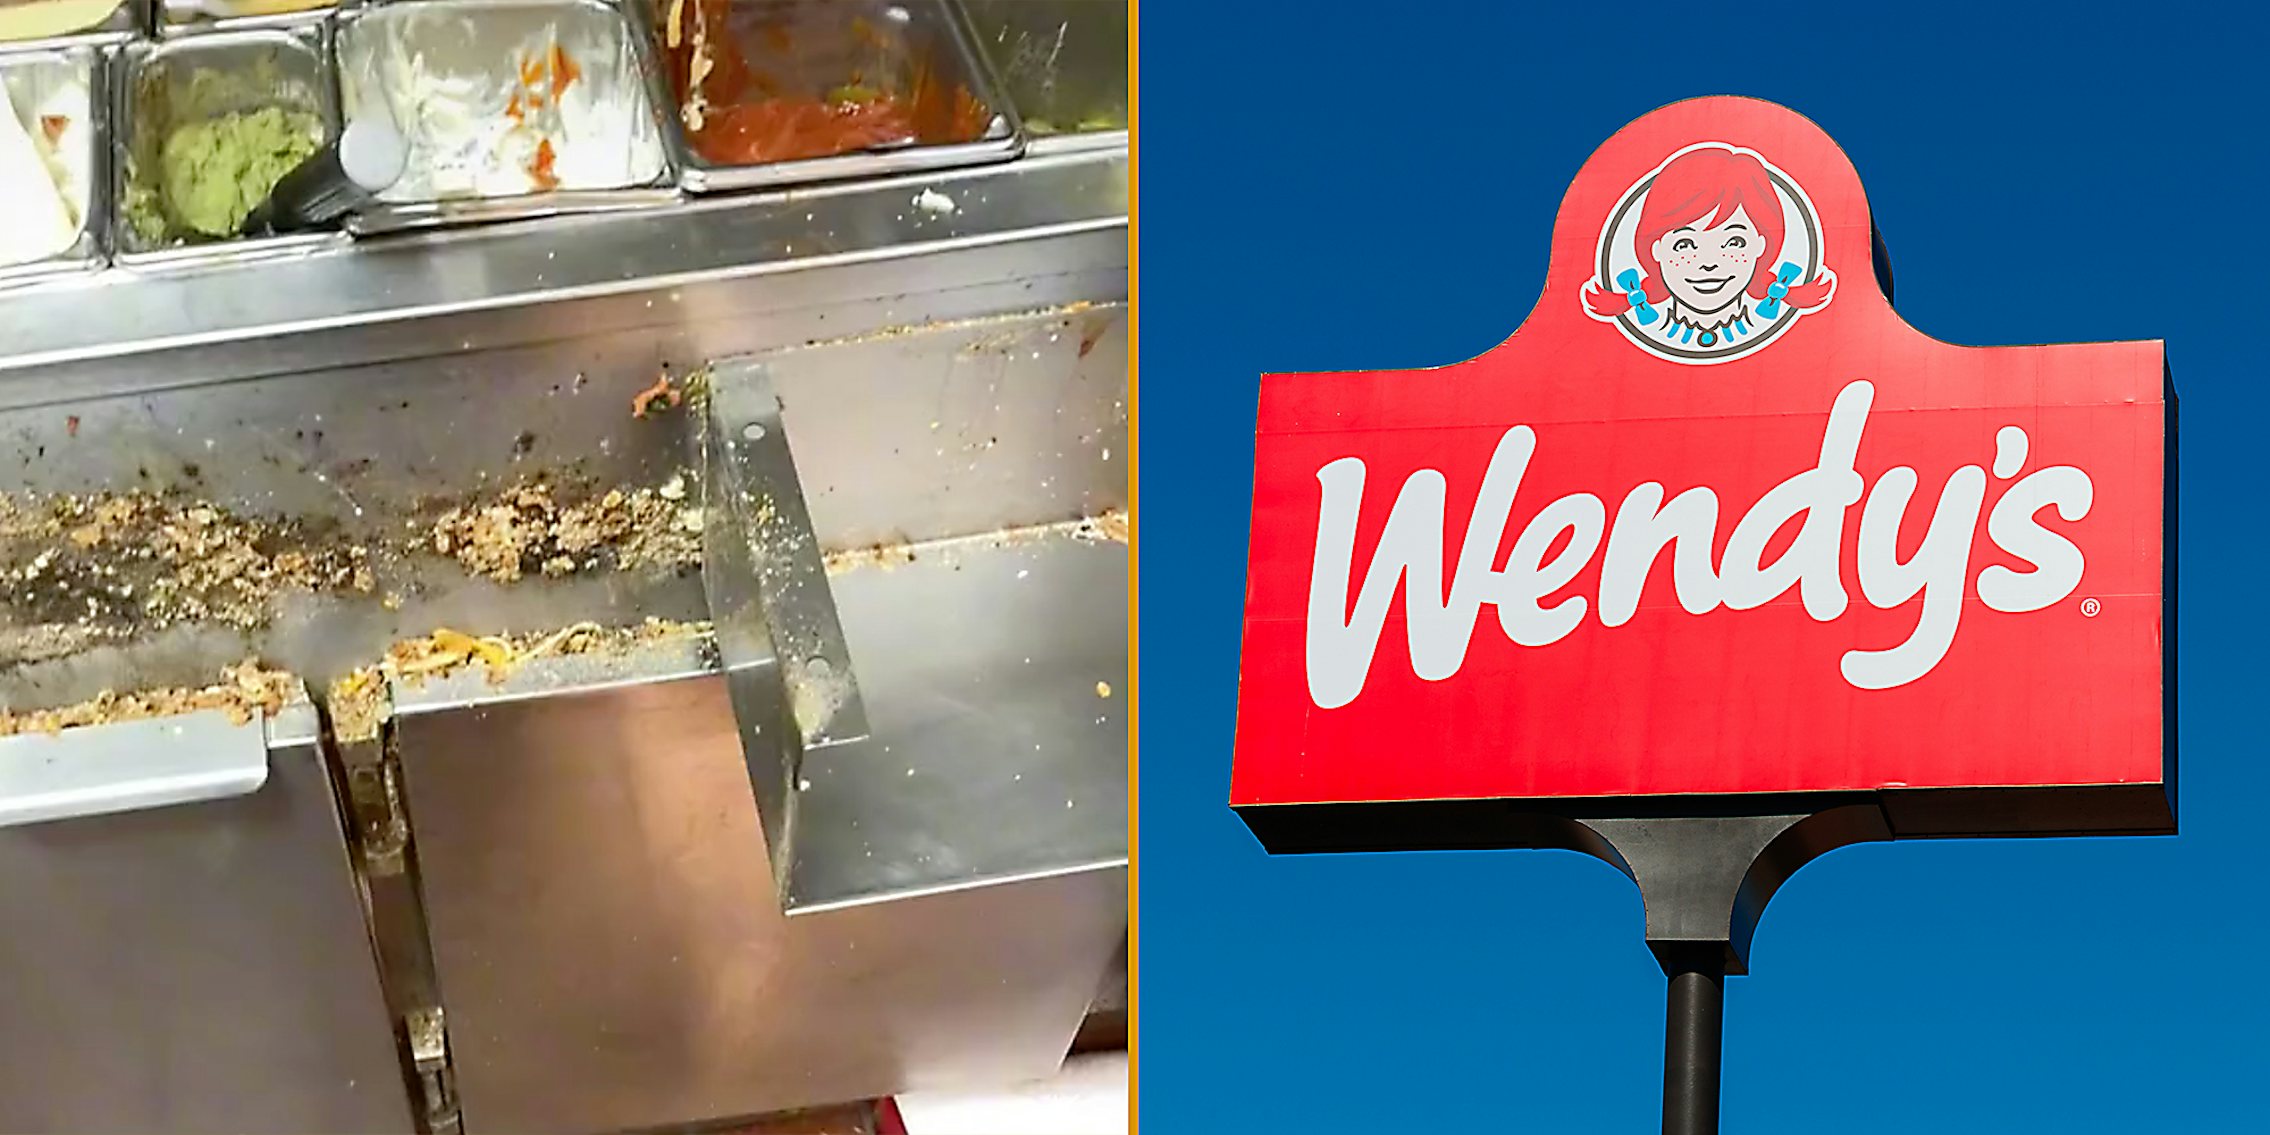 A dirty kitchen (L) and a Wendy's sign (R).